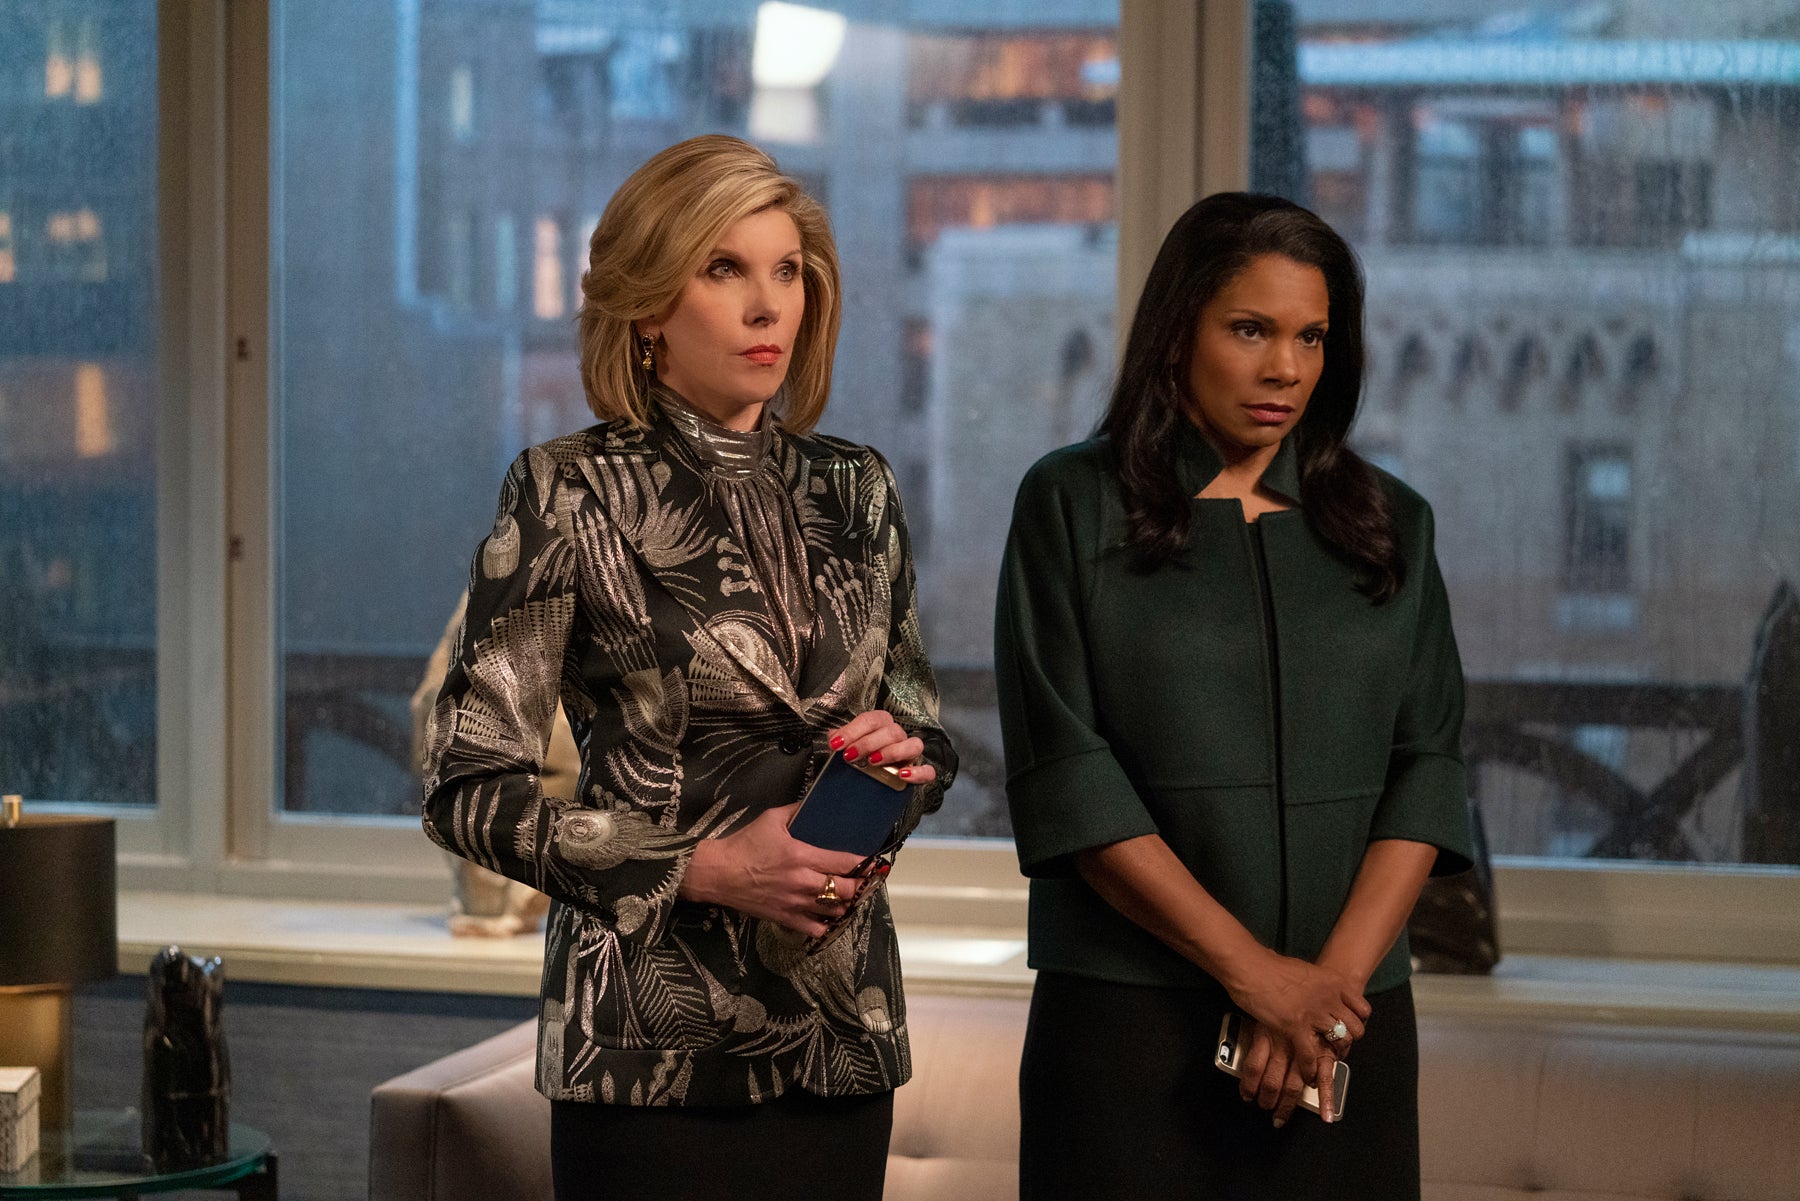 Diane Lockhart and Liz Reddick look serious during a meeting. Diane is wearing a shiny, patterned blazer and shirt with black pants. Liz is wearing a voluminous dark green coat and black pants. They are both holding their cellphones.